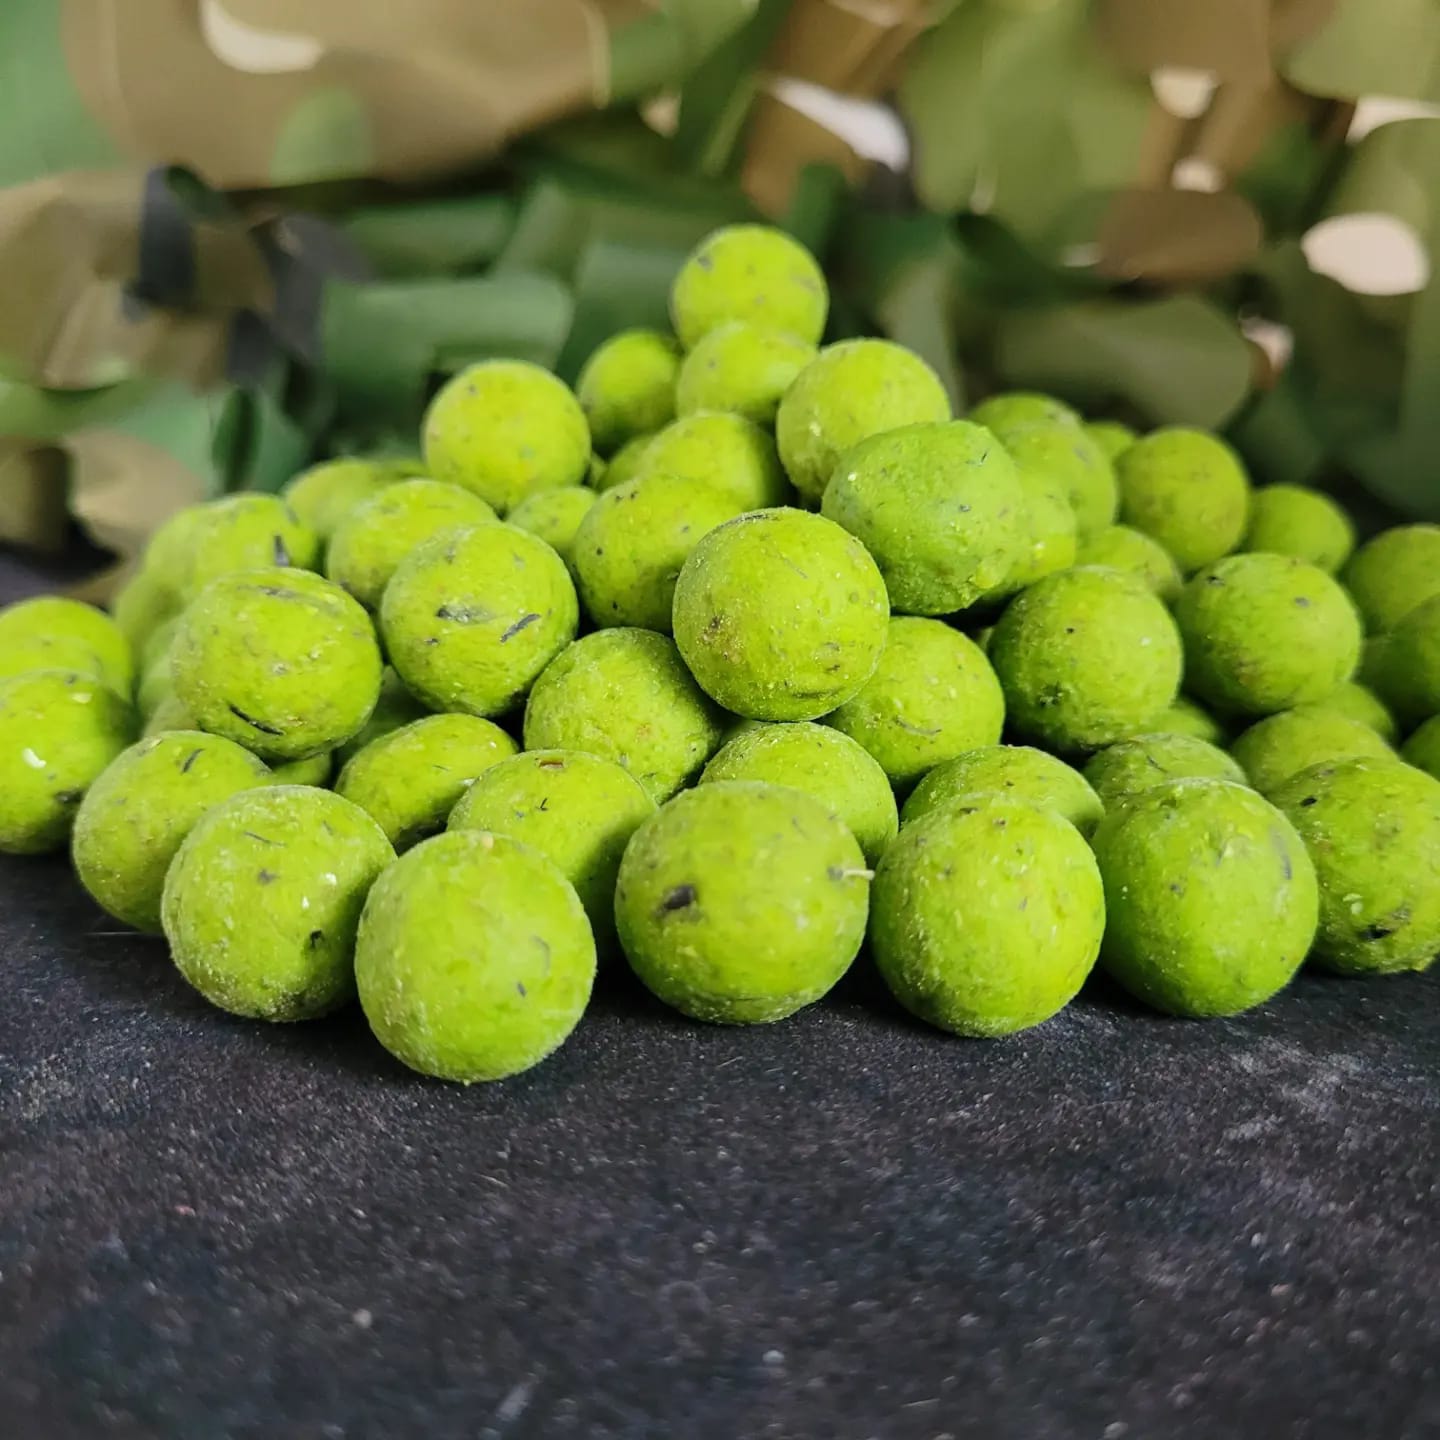 GLM Boilies (Green Lipped Mussel) TorBaits